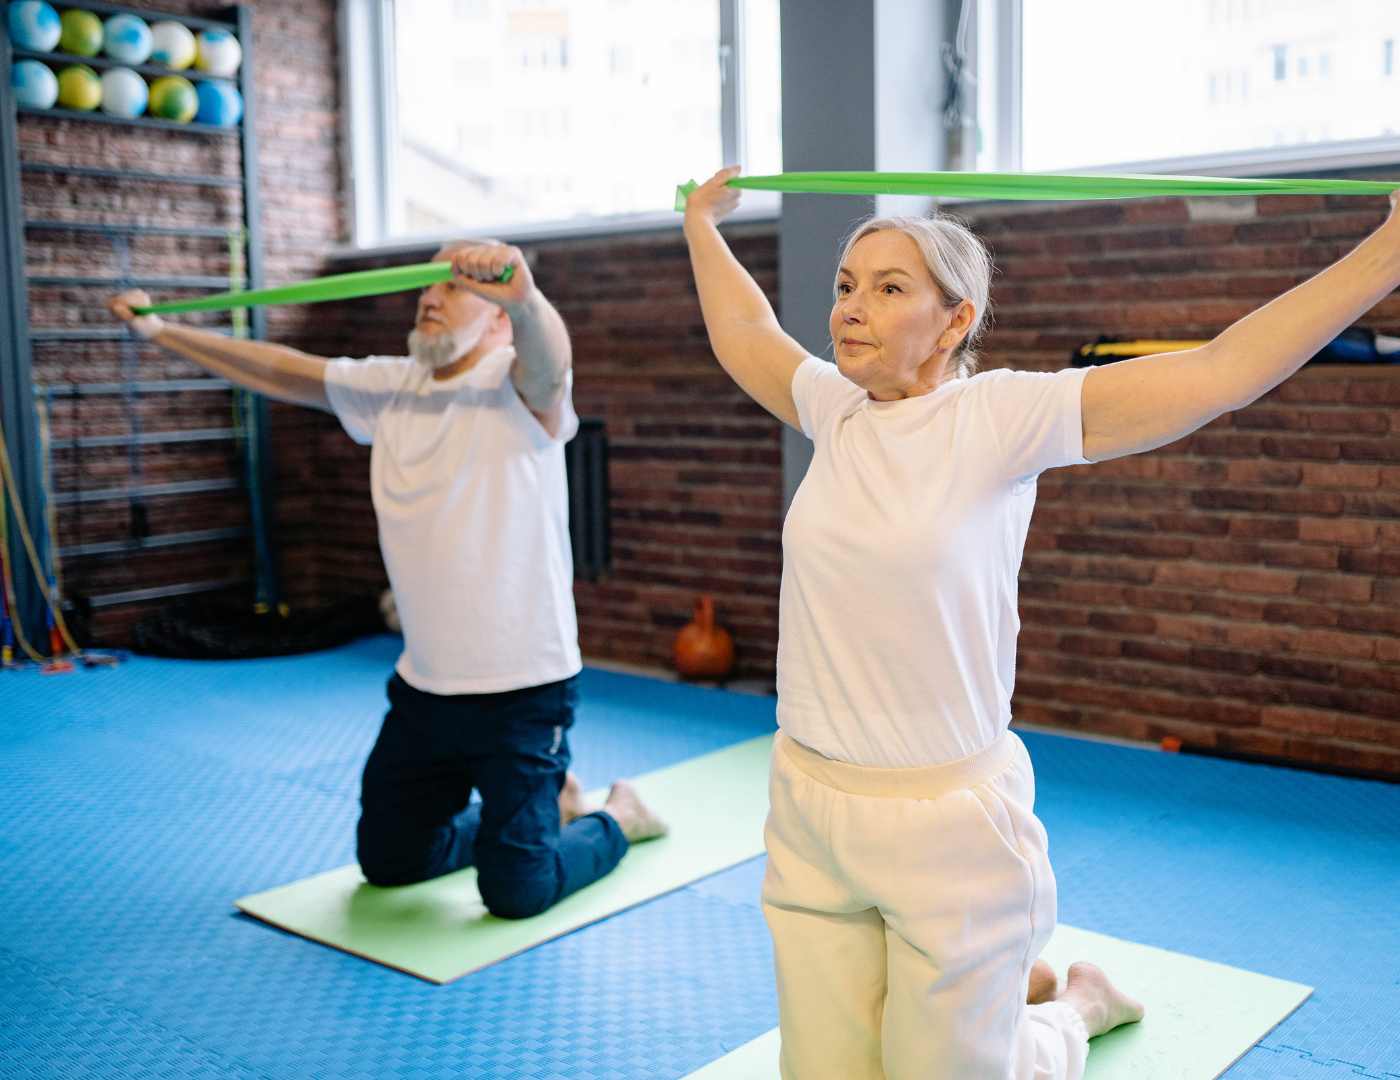 making an investment in your health and fitness as you age